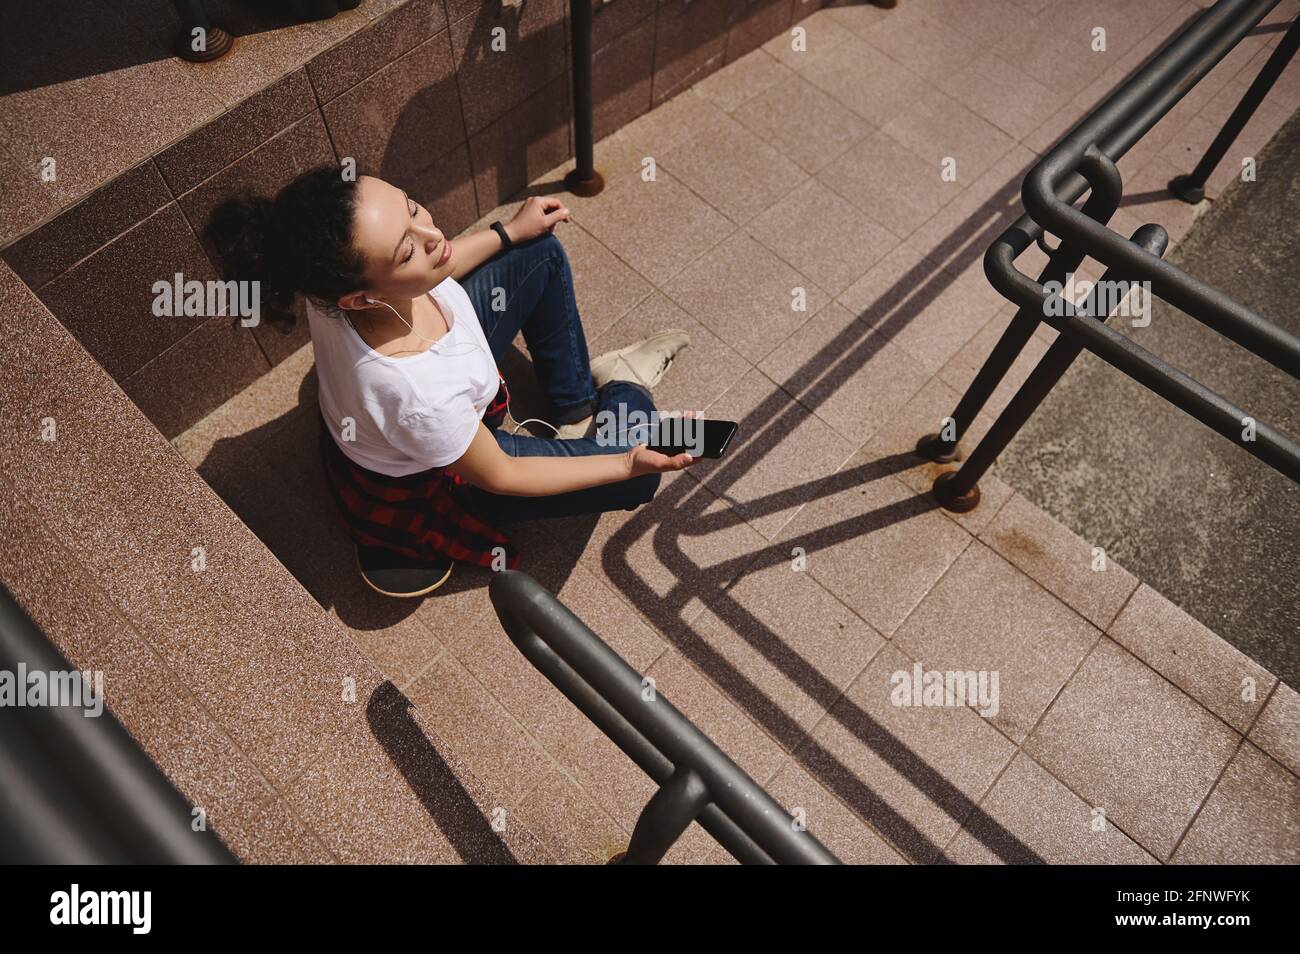 High angle view of a woman relaxing sitting on skateboard with headphones and smartphone in her hand and taking sun bathing outdoors Stock Photo